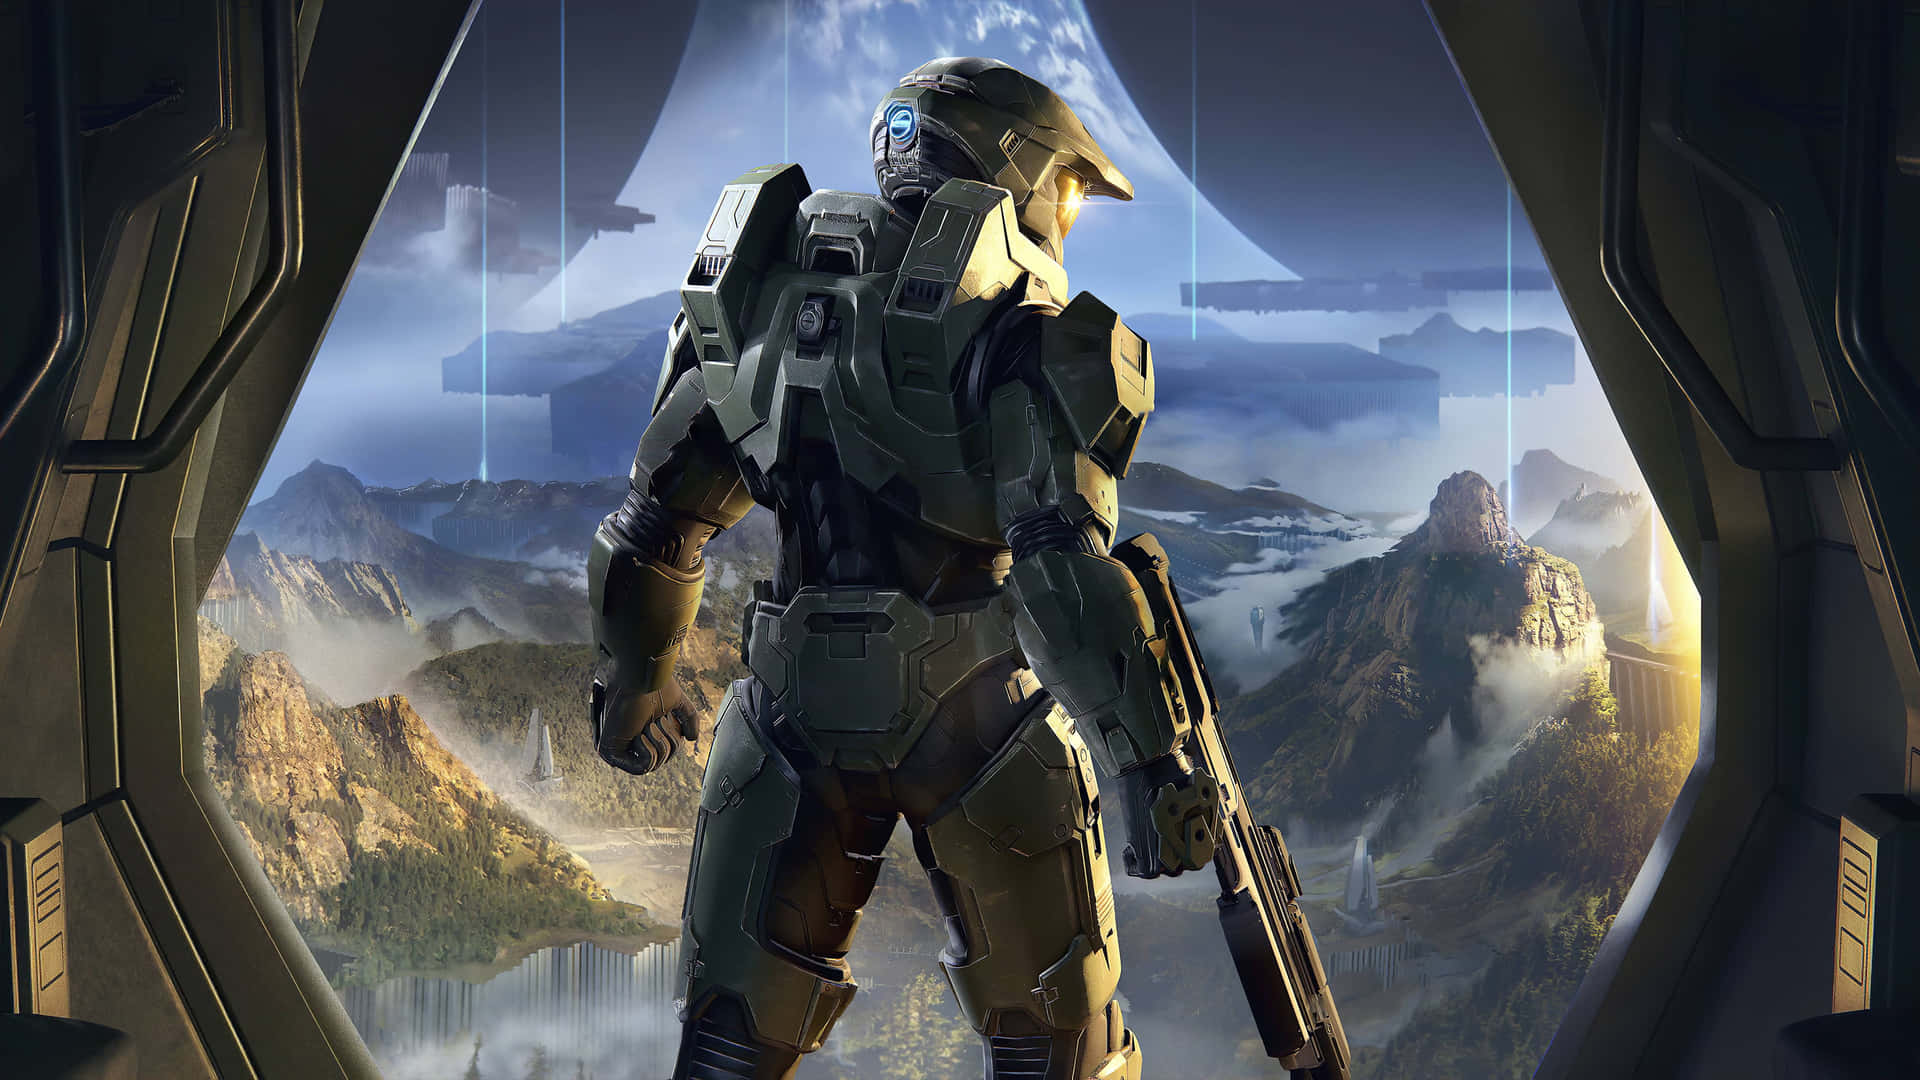 Experience the Thrill of Battle in the Halo Franchise